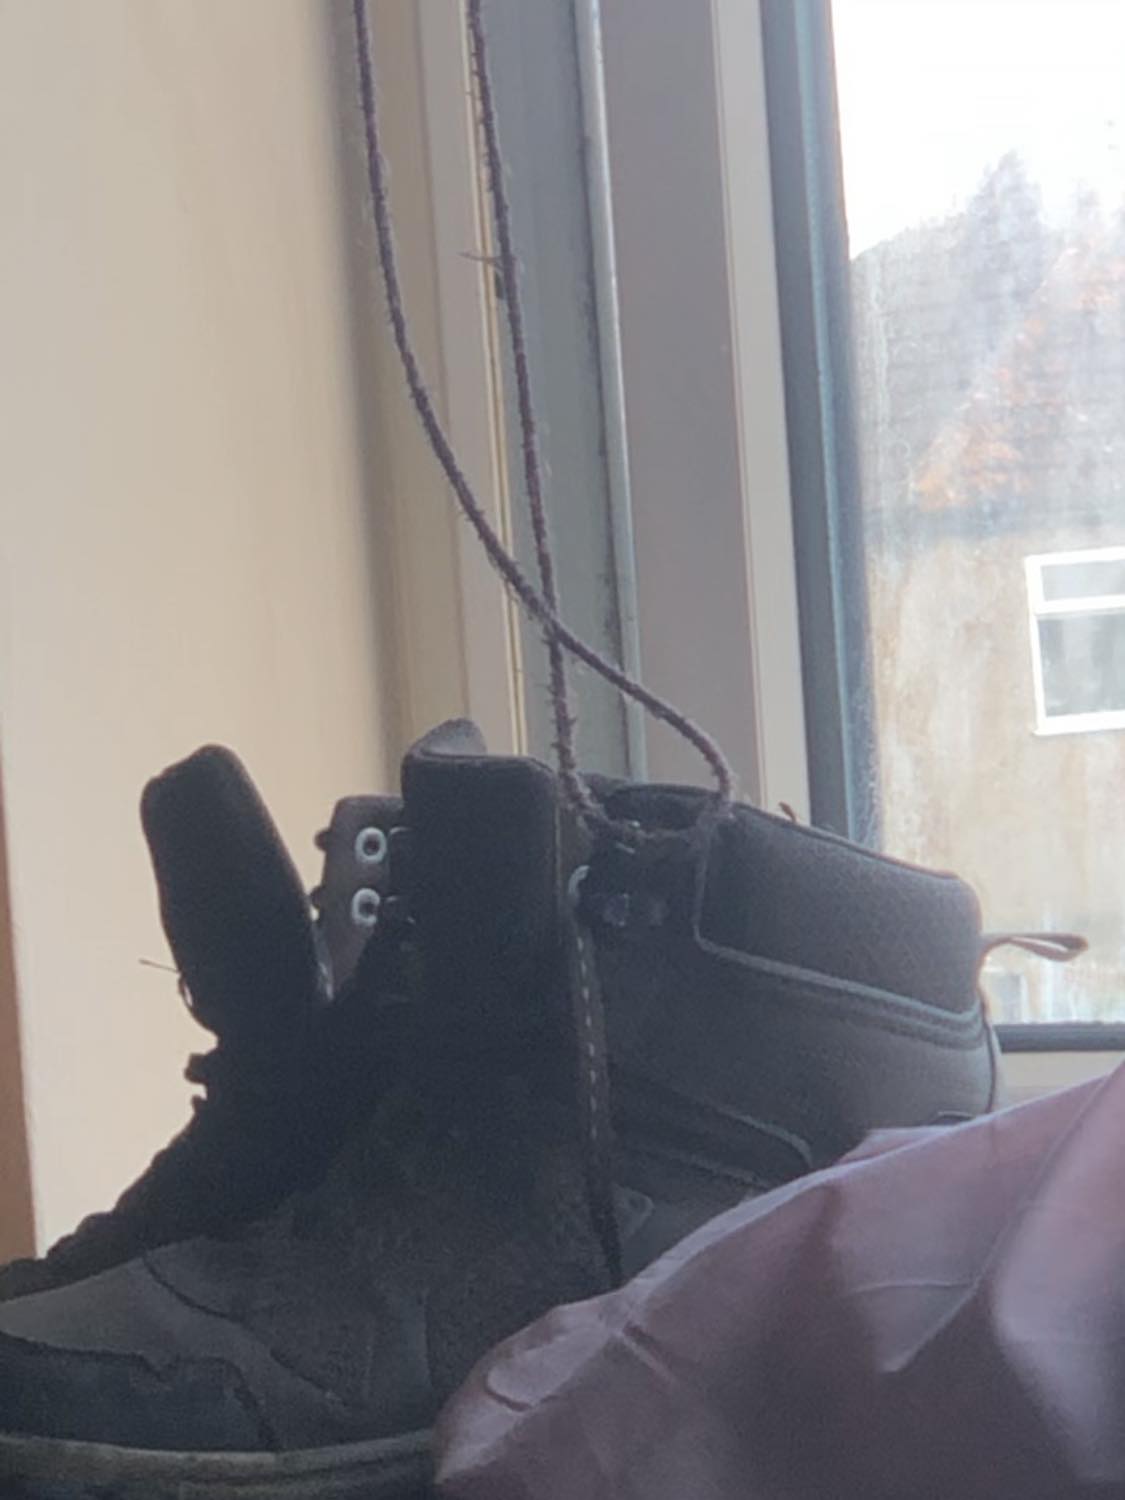 Our little housefly friend sitting on my Abby's shoes, a brown leather-style high-top, sitting beside the open window. The fly is standing on the ankle ridge, looking into the room.